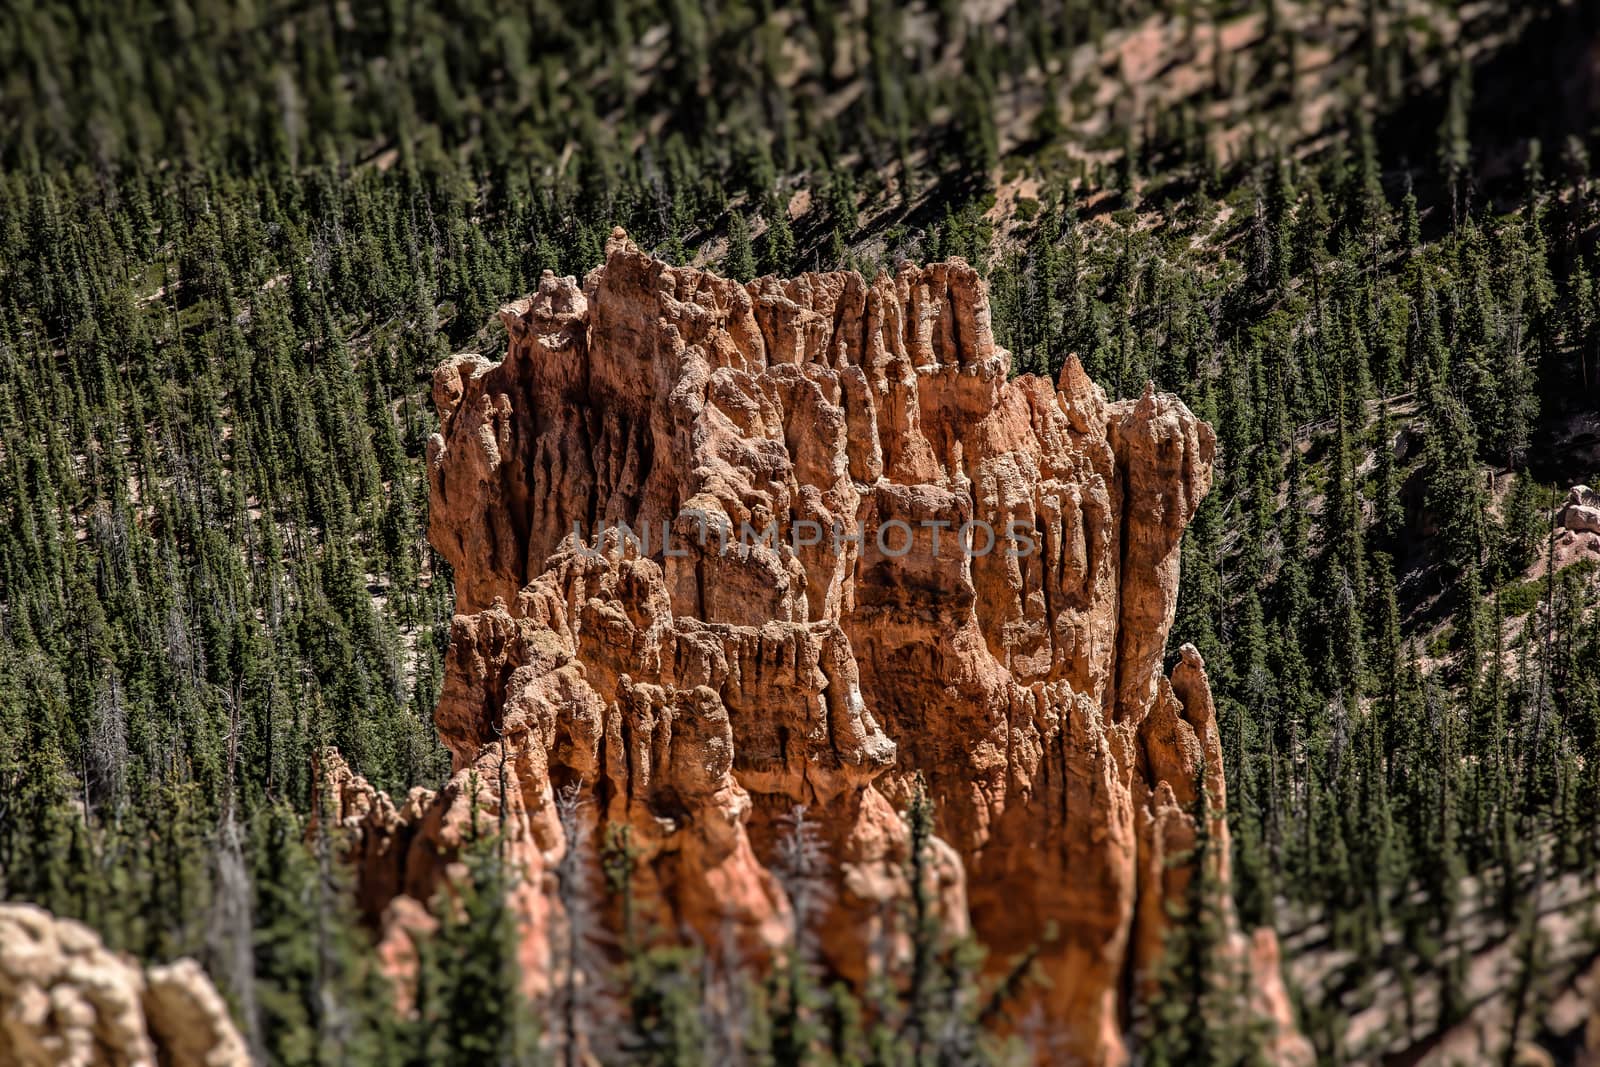 Bryce Canyon National Park in Utah is a marvel of rock formations (hoodoos) hiking trails and scenic views.